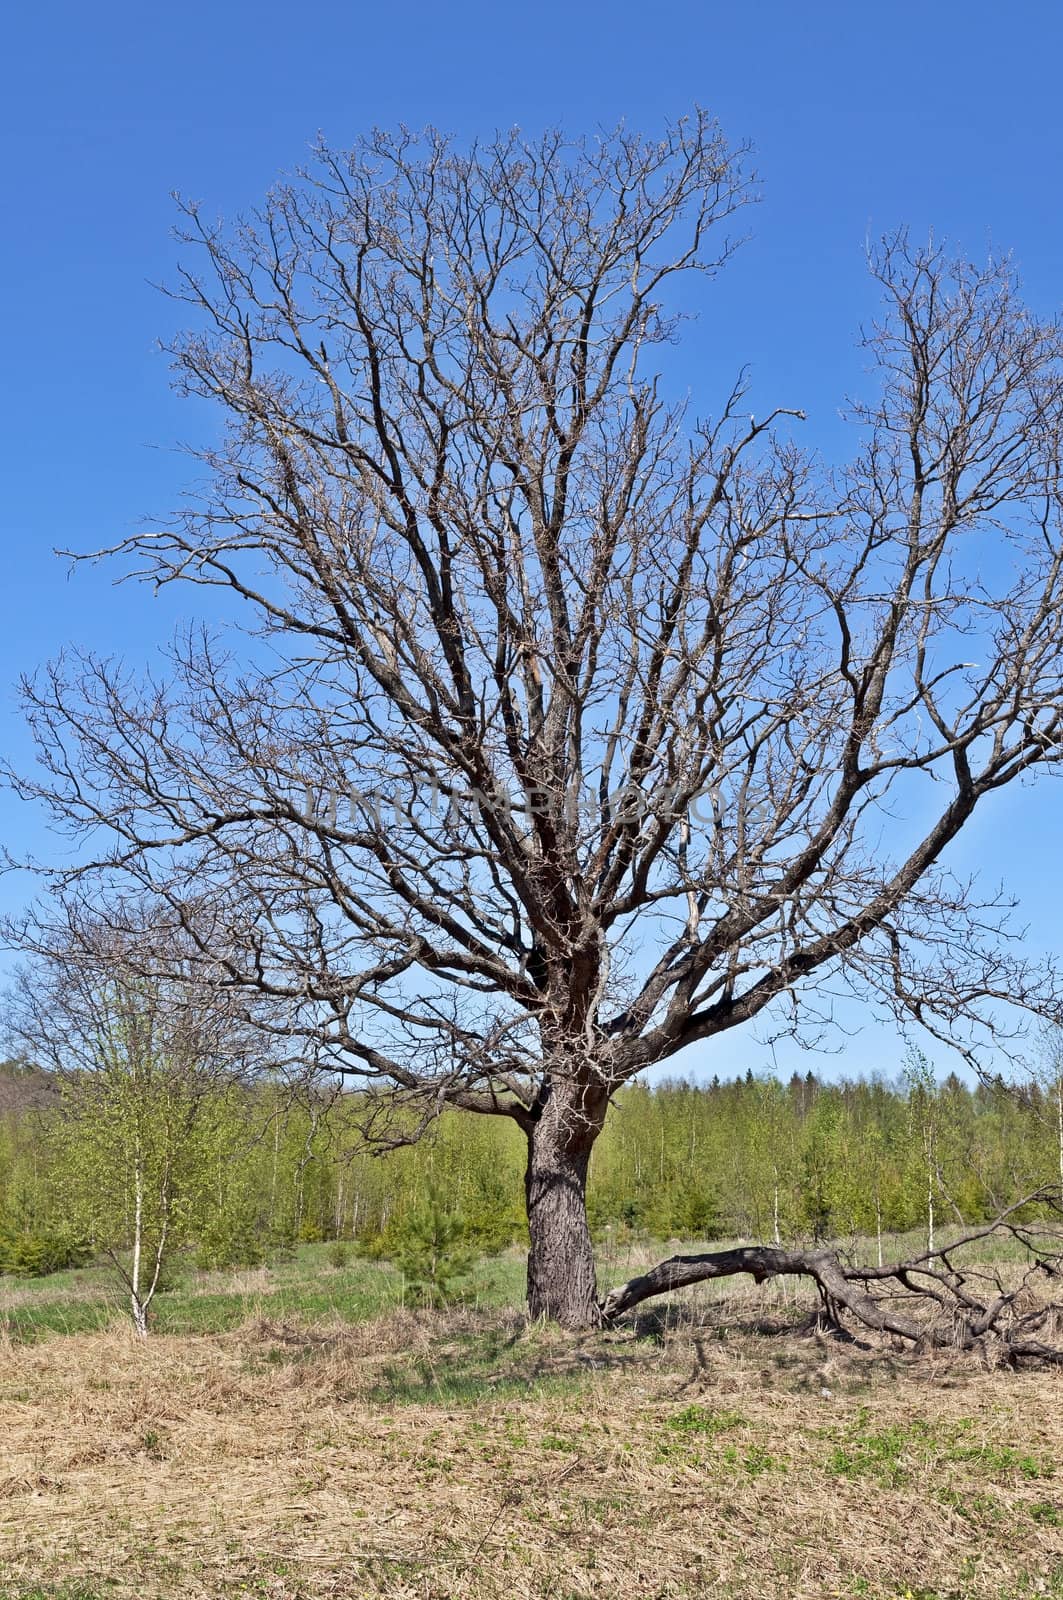 Solitary bare oak tree in forest glade on sunny spring day